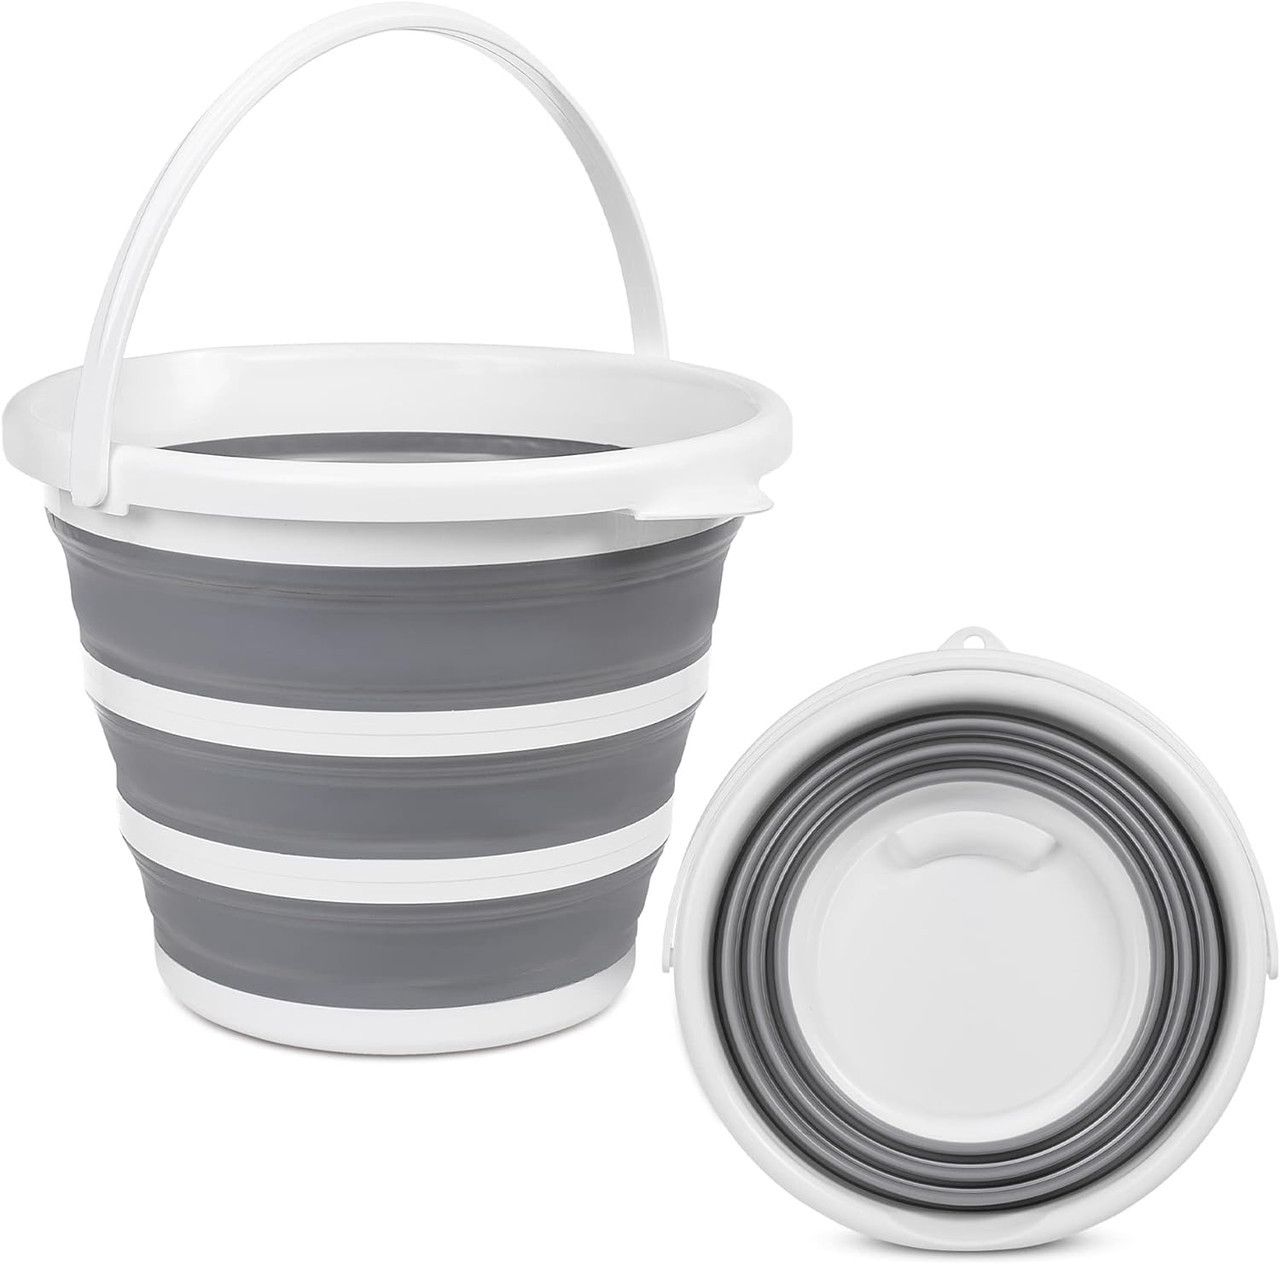 Collapsible Bucket 10l with Lid and Handle | Foldable bucket 10 litre for  camping, fishing, cleaning etc. | Water Bucket made of Plastic & Silicone